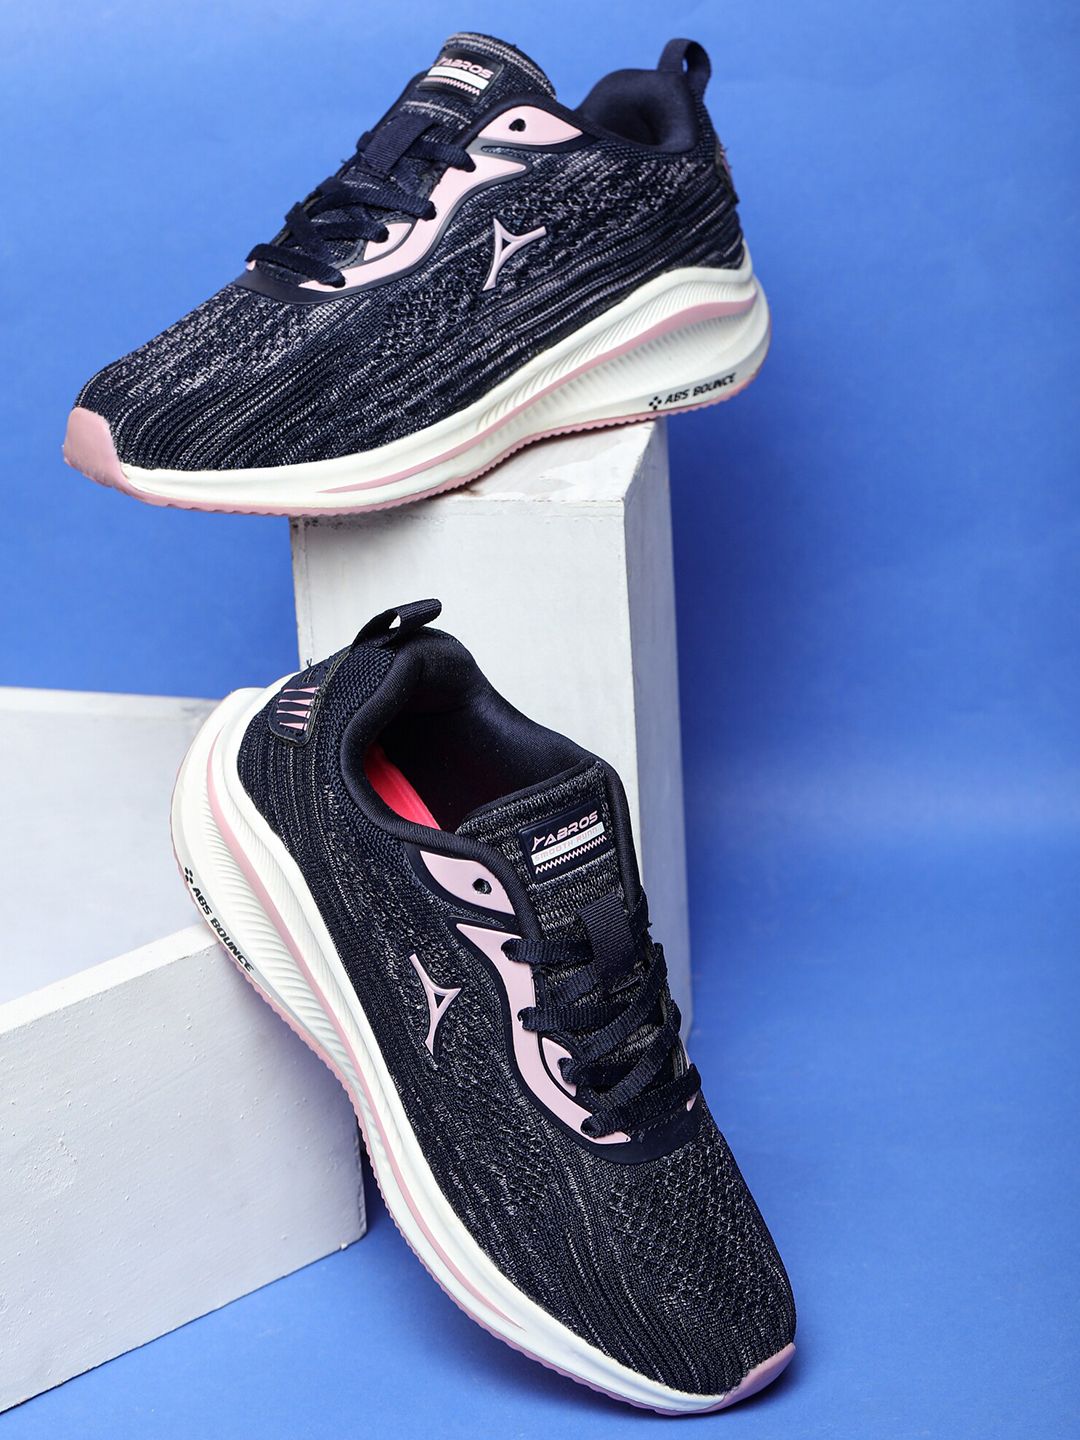 ABROS Women Navy Blue Mesh Running Shoes Price in India